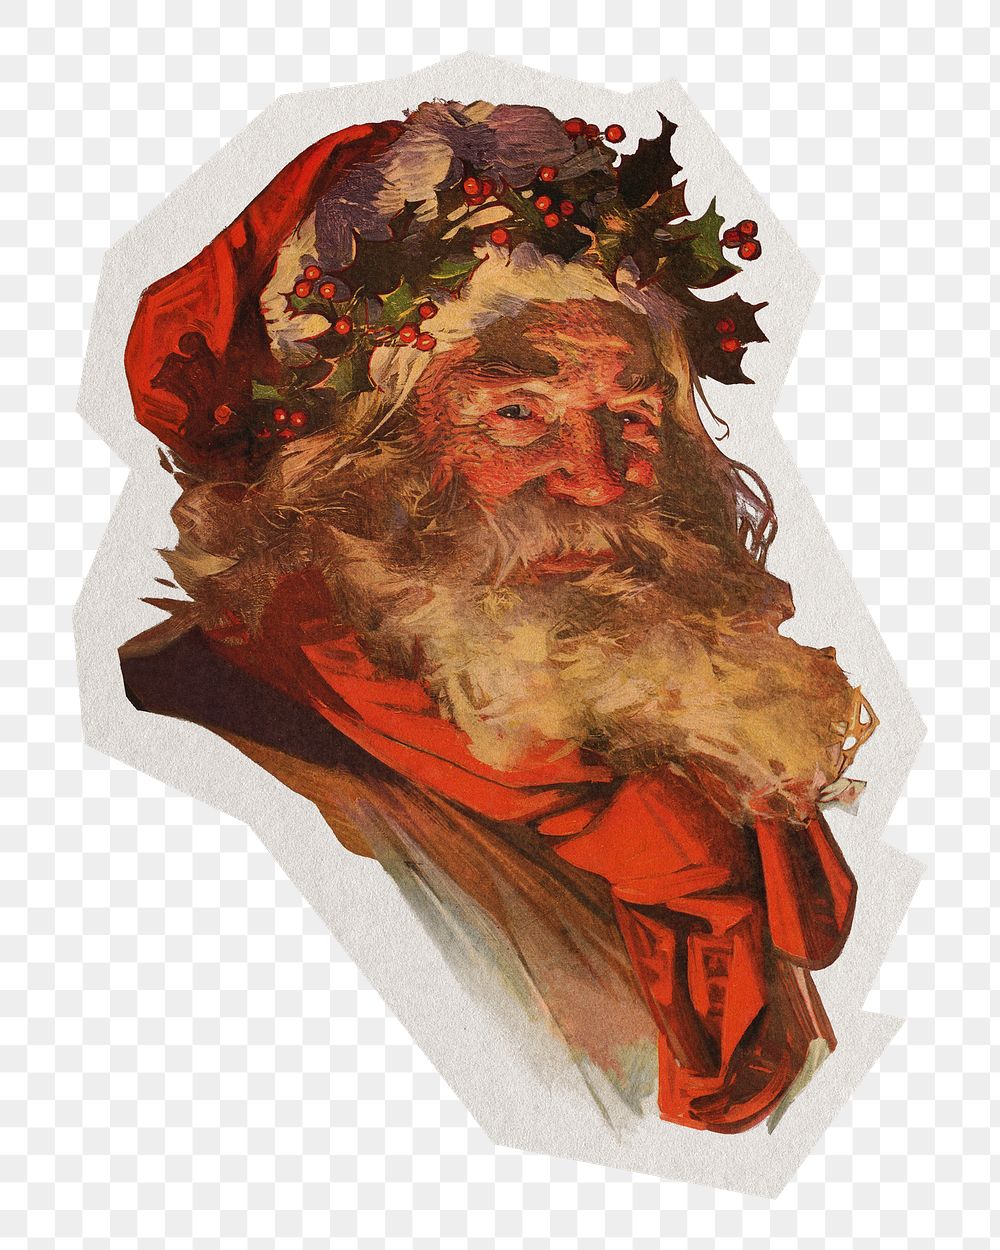 Santa Claus png sticker, illustration by Joseph Christian Leyendecker on transparent background, remixed by rawpixel.